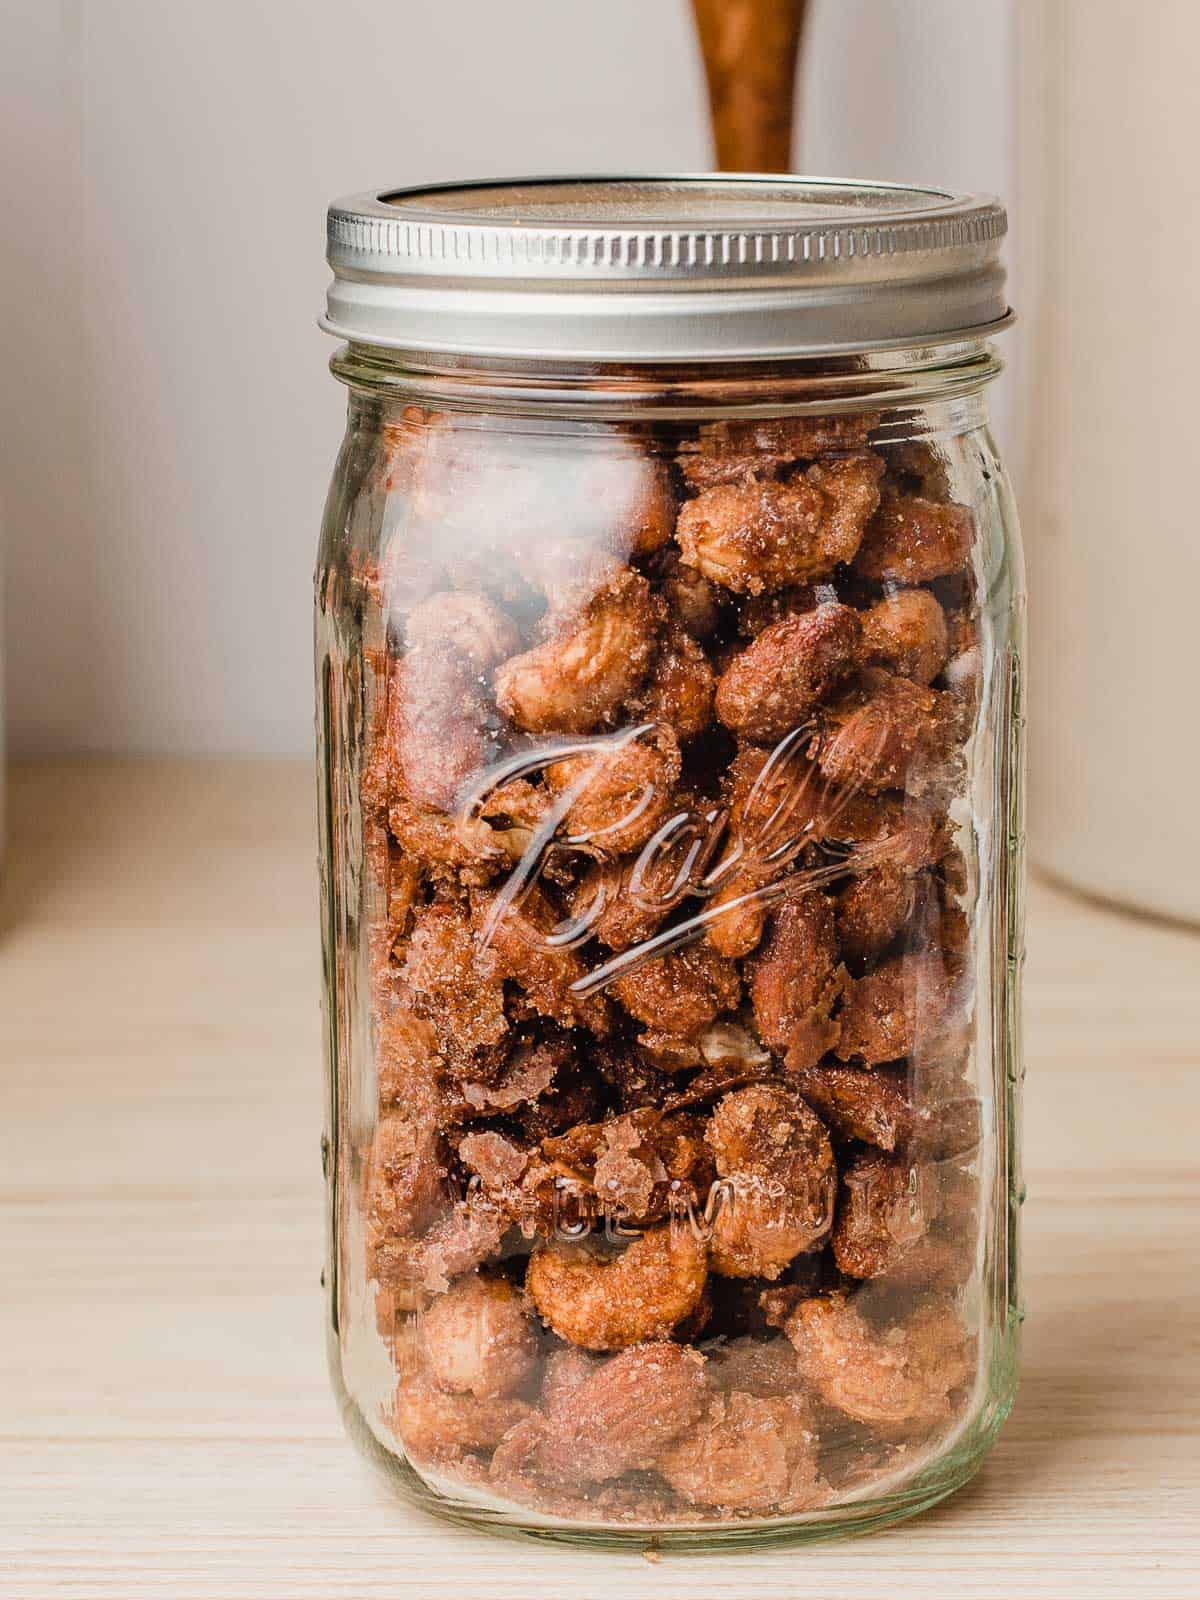 A glass jar filled with candied nuts for storage.